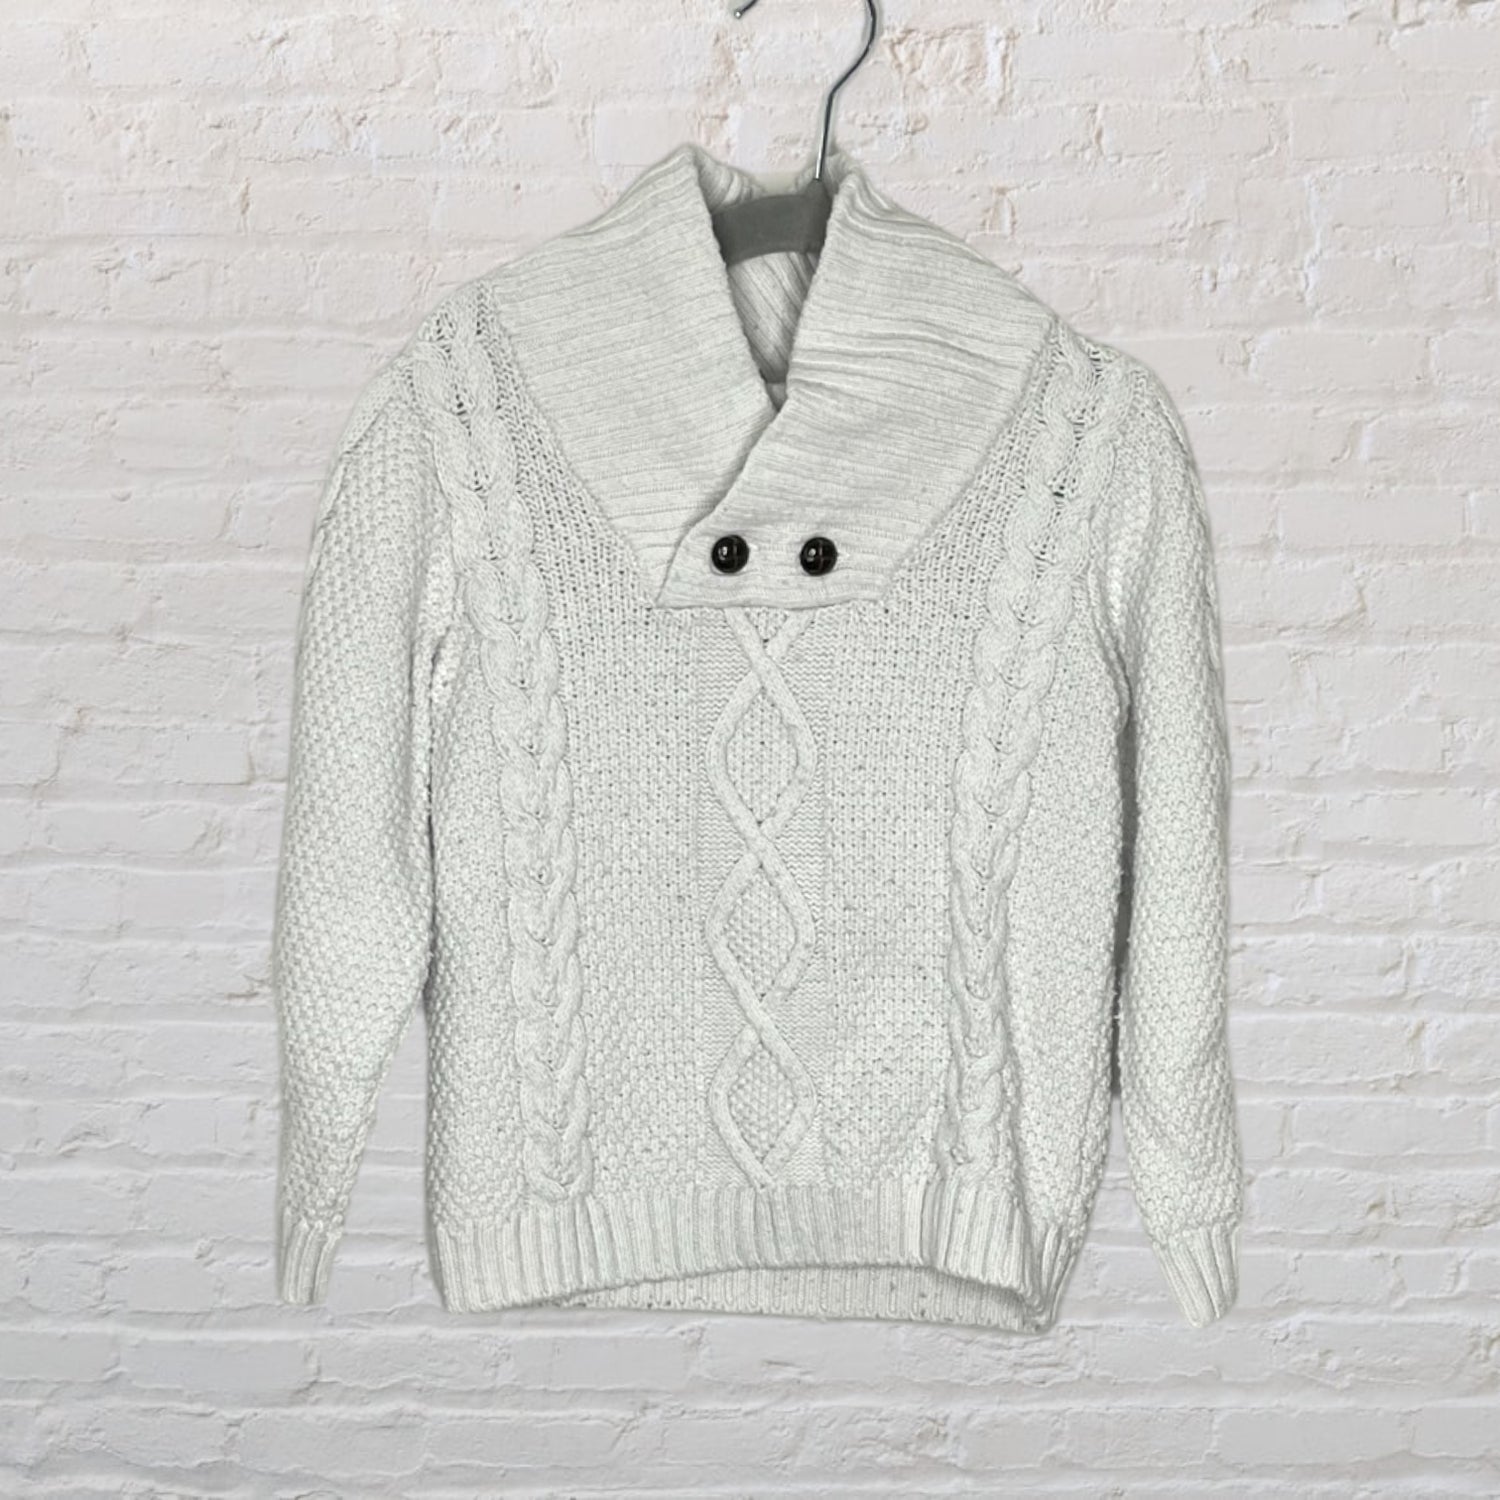 Janie and Jack Wool-Blend Knit Sweater (2T)